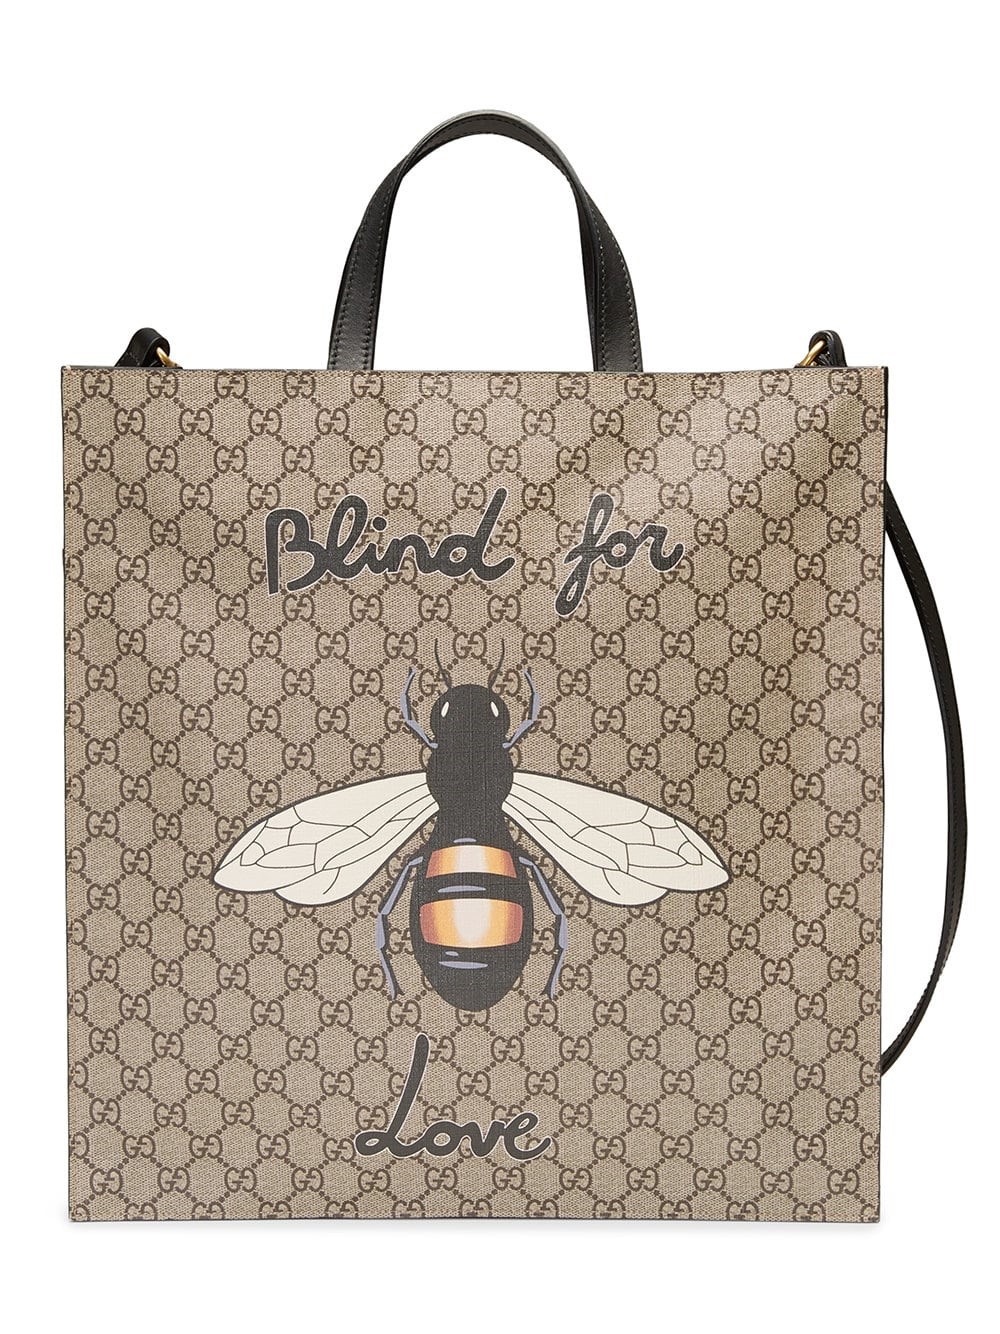 gucci BLIND FOR LOVE BEE TOTE available on 0 - 25986